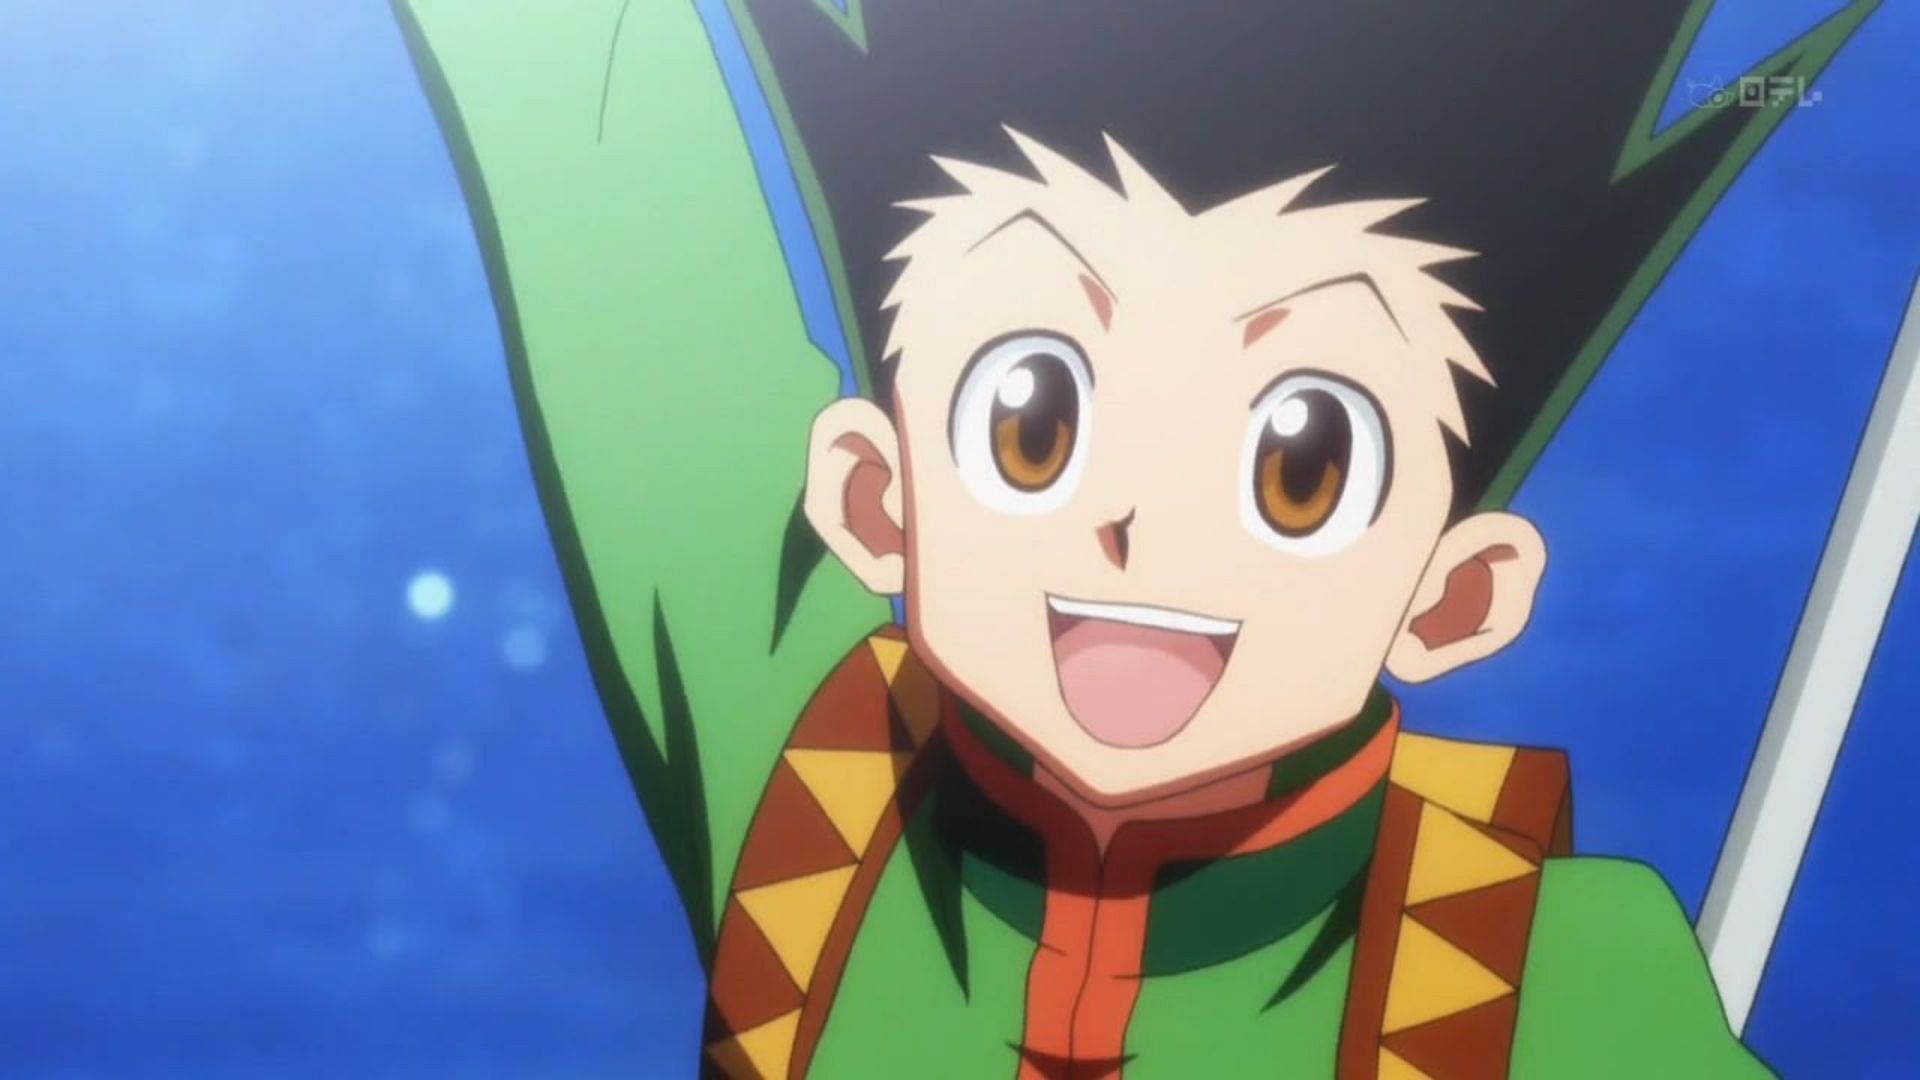 Gon Freecss as seen in the Hunter x Hunter anime (Image via Madhouse)